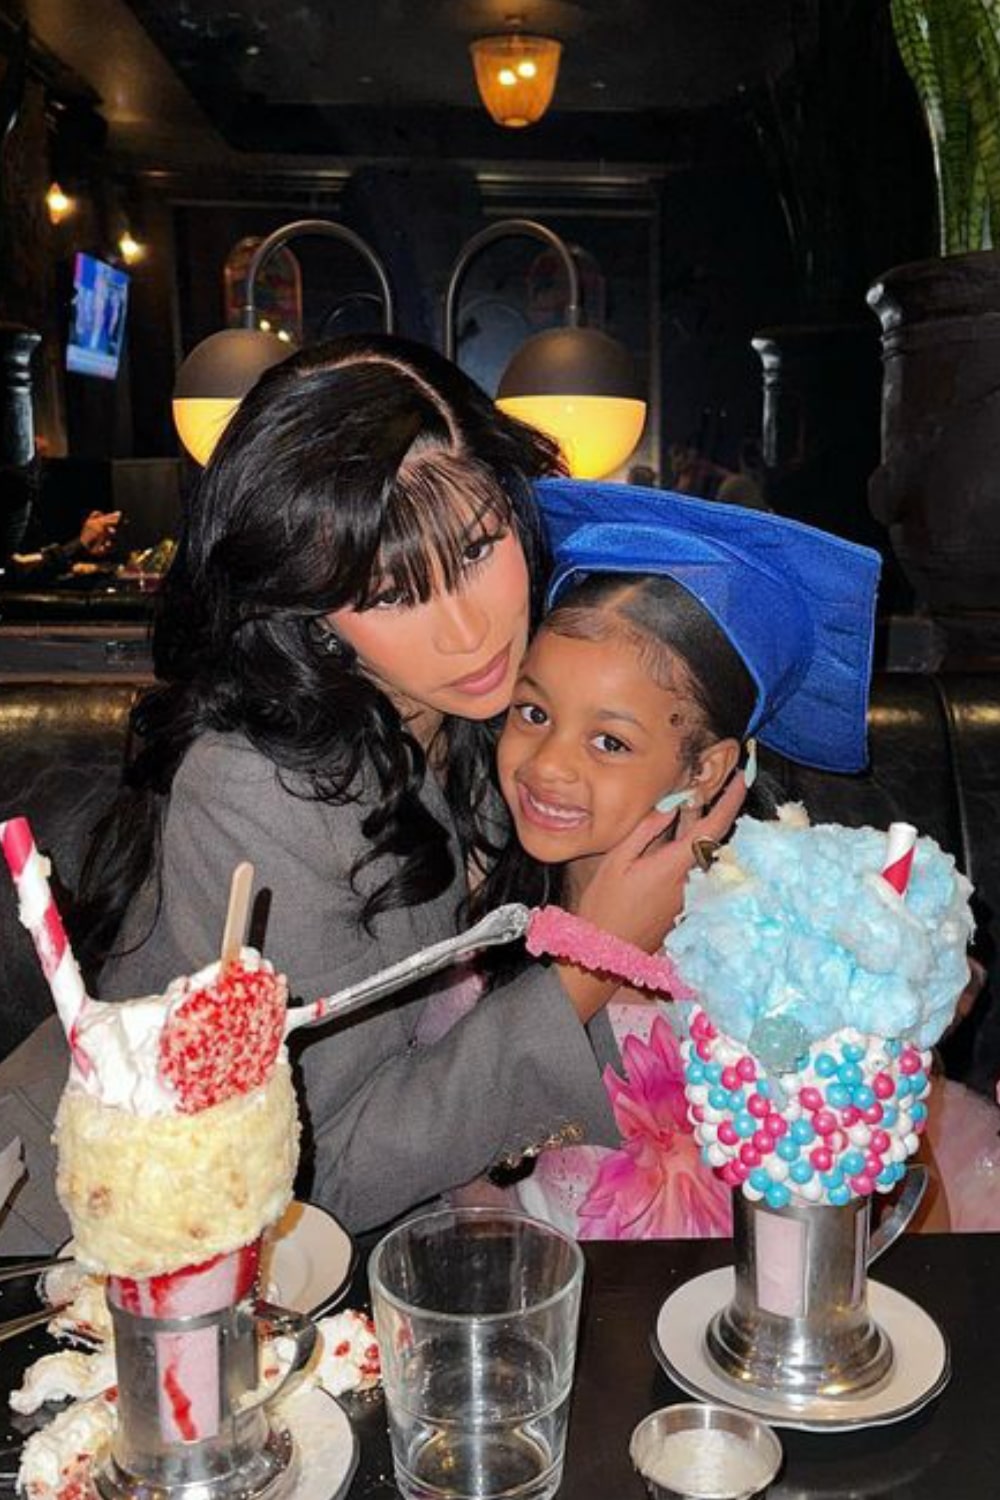 "Give me good grades and I'll give you the world, baby" - Cardi B emotionally celebrates daughter Kulture's graduation in style